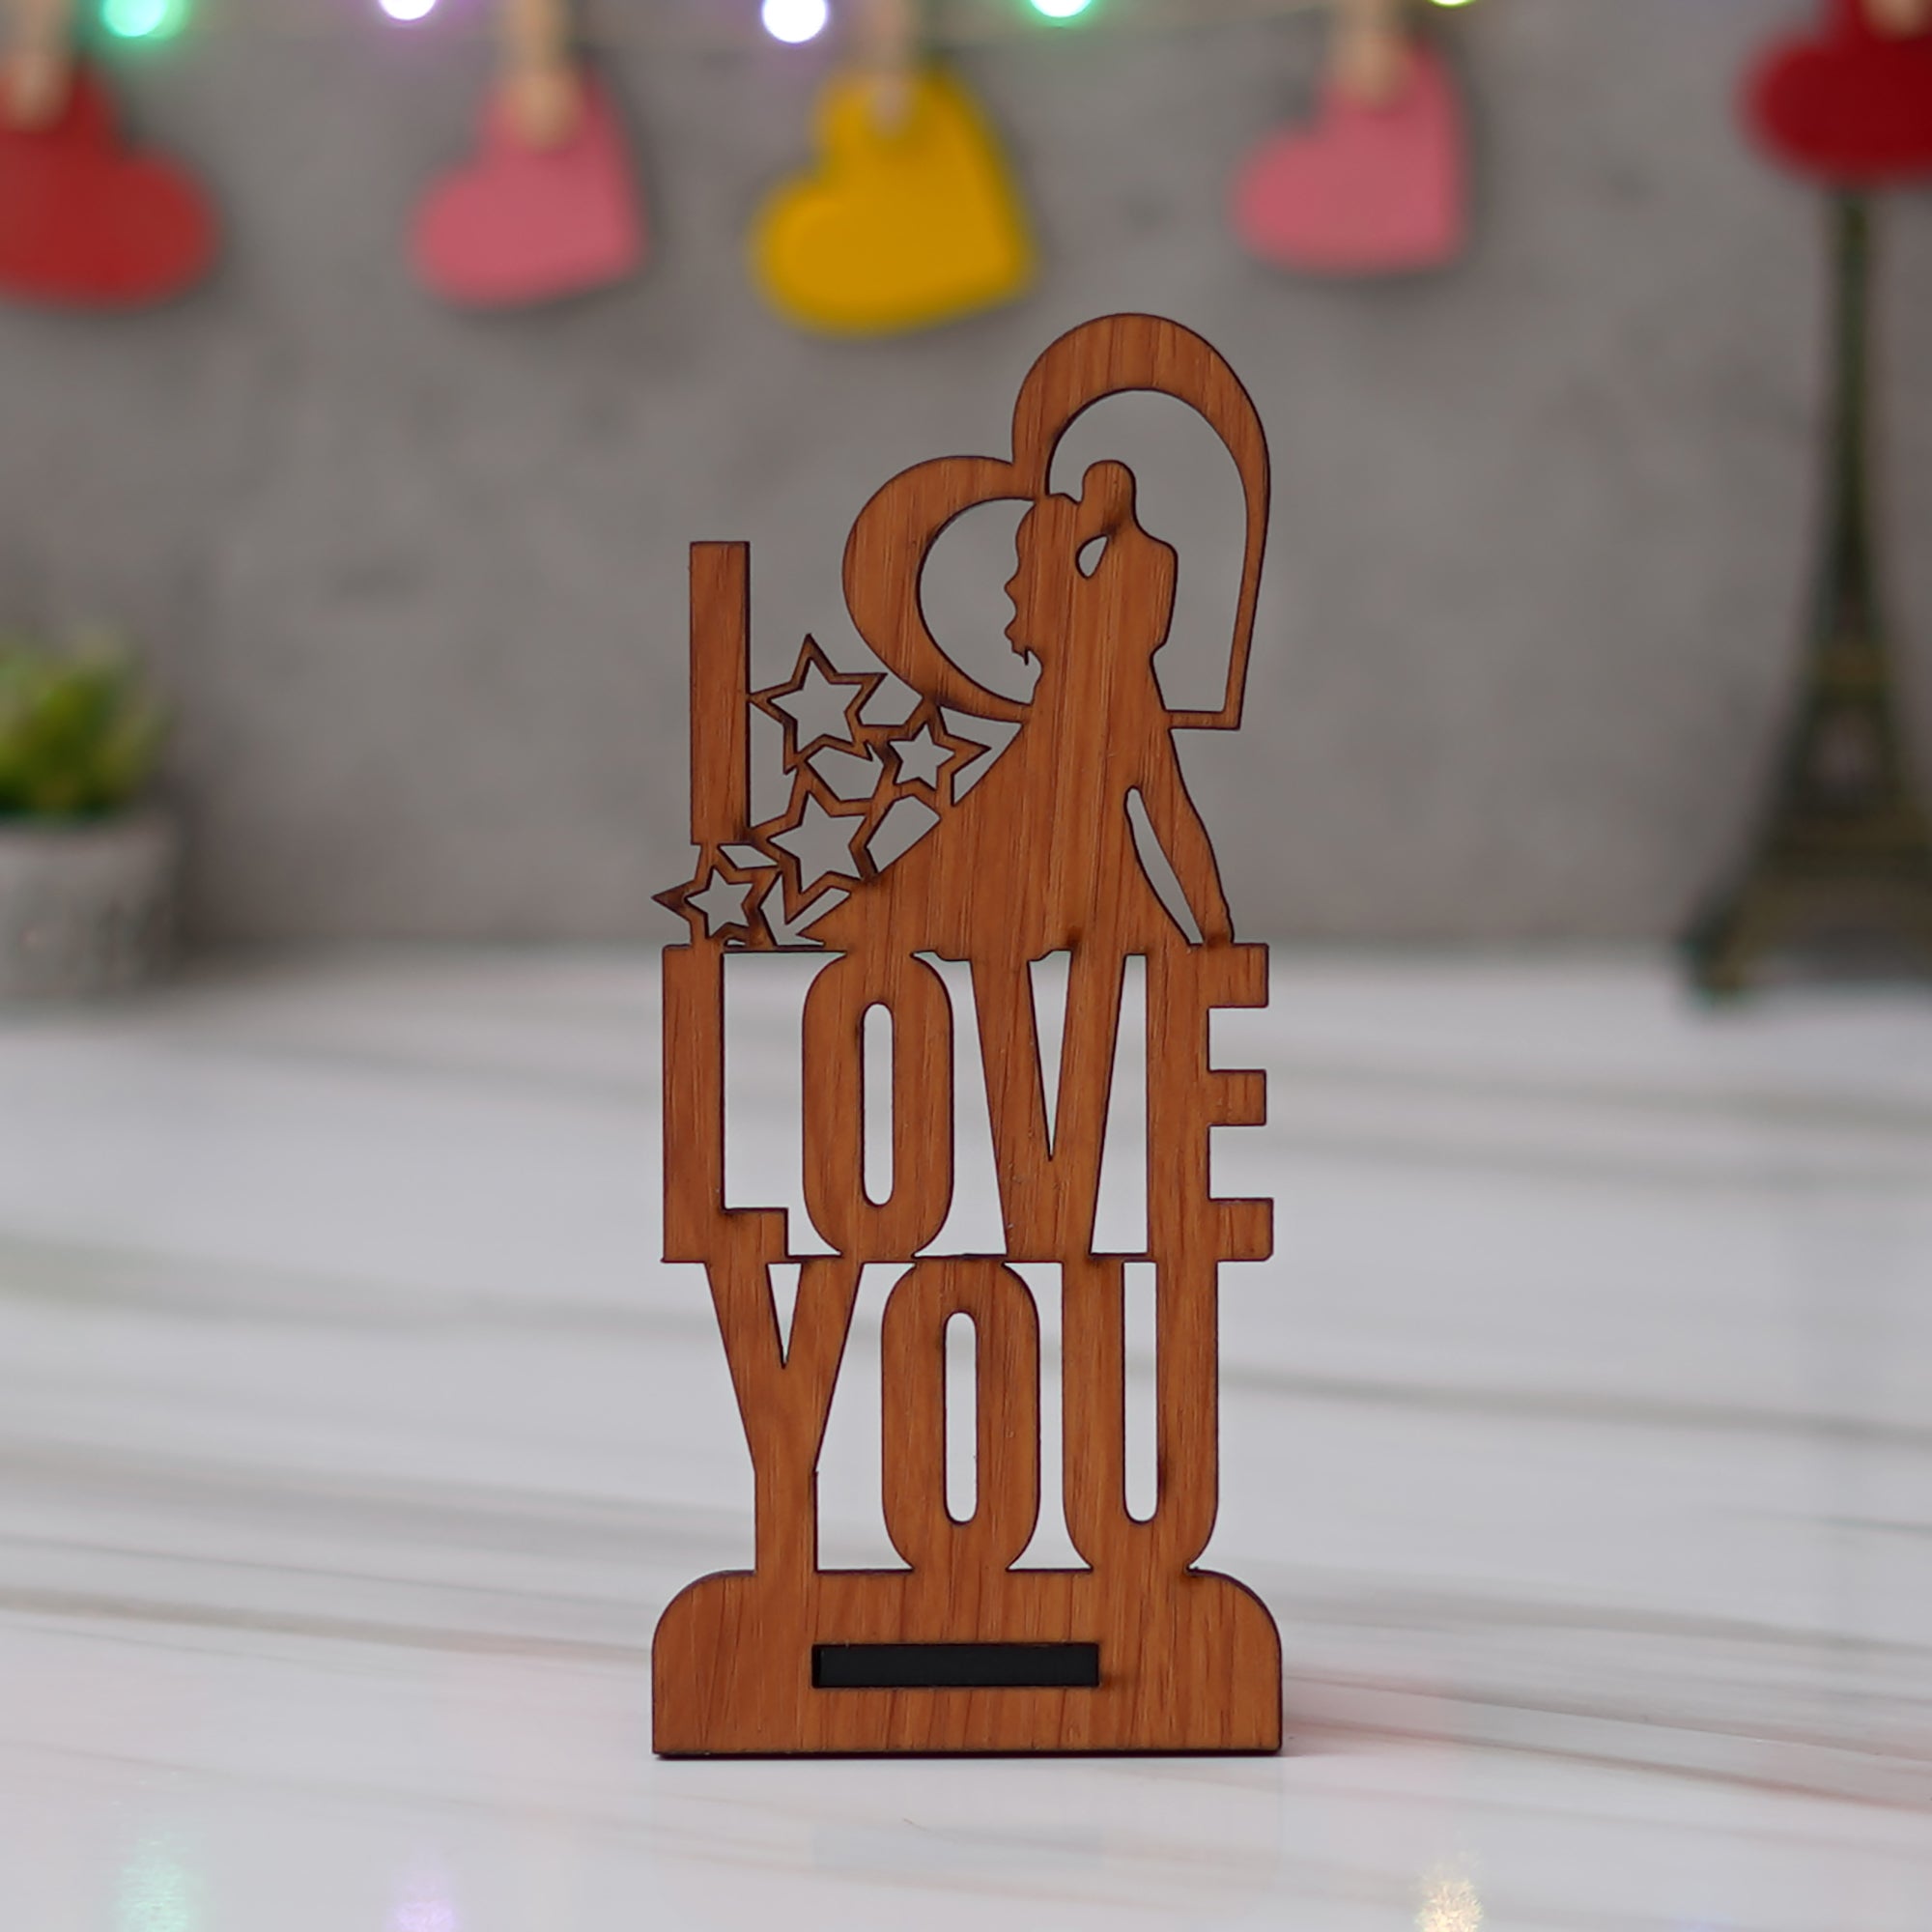 Valentine Combo of Pack of 8 Love Gift Cards, "Love You" Wooden Showpiece With Stand, Pink Heart Shaped Gift Box with Teddy and Roses 3